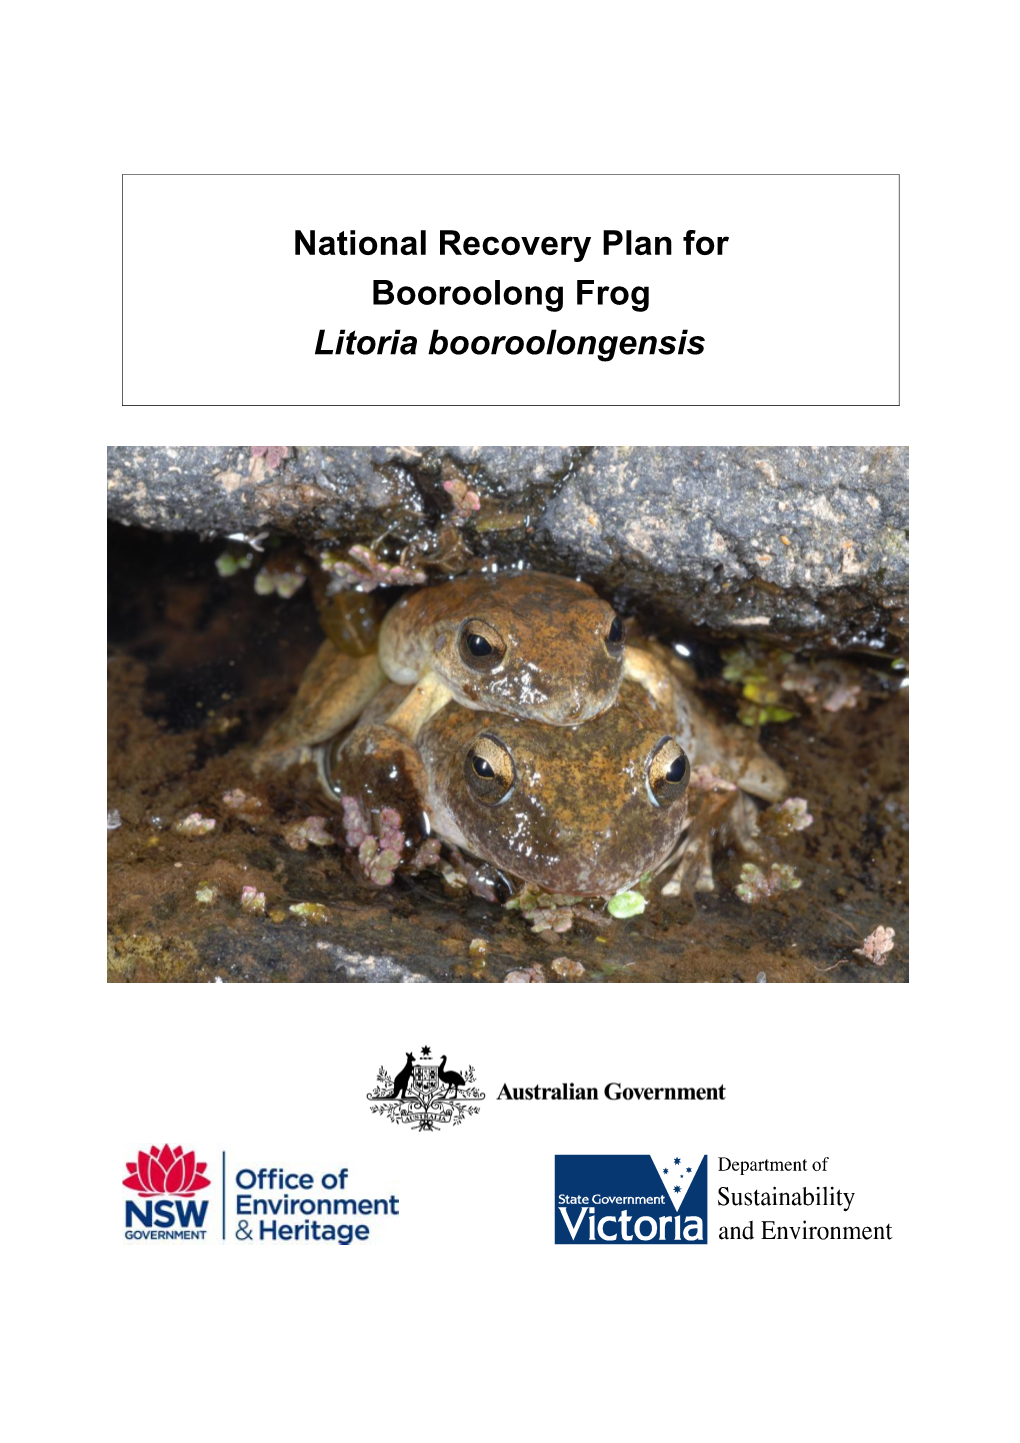 National Recovery Plan for Booroolong Frog Litoria Booroolongensis